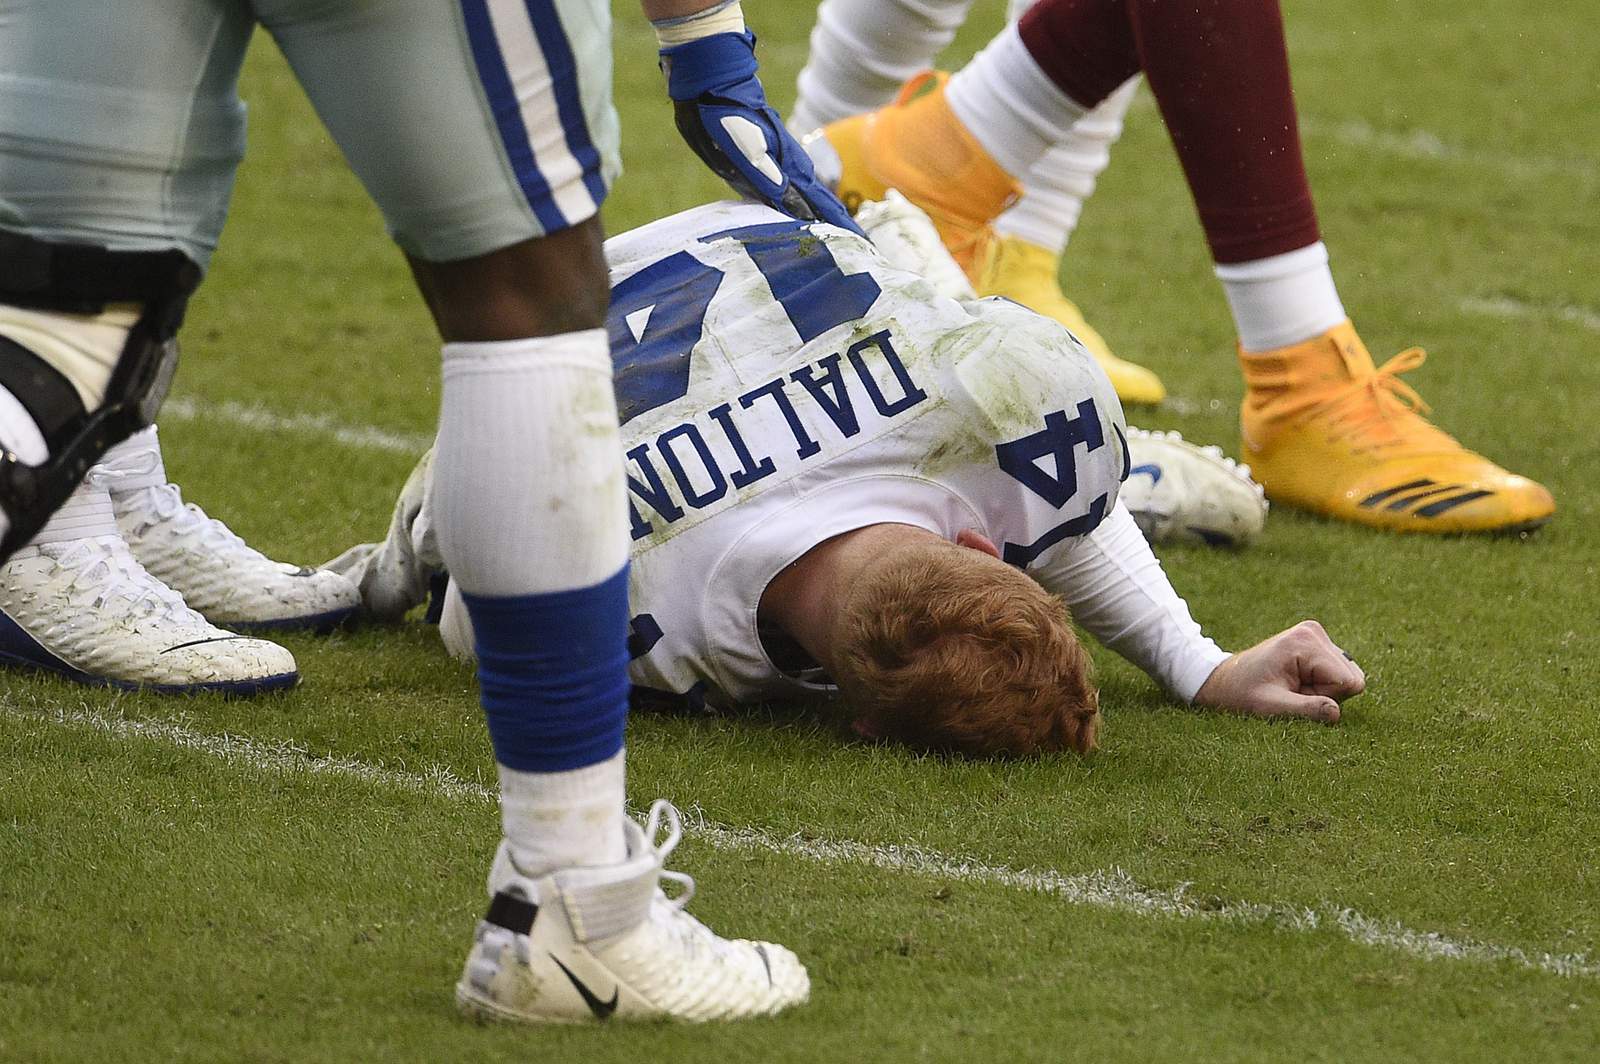 McCarthy upset Cowboys didn’t confront Washington linebacker after illegal hit on Andy Dalton